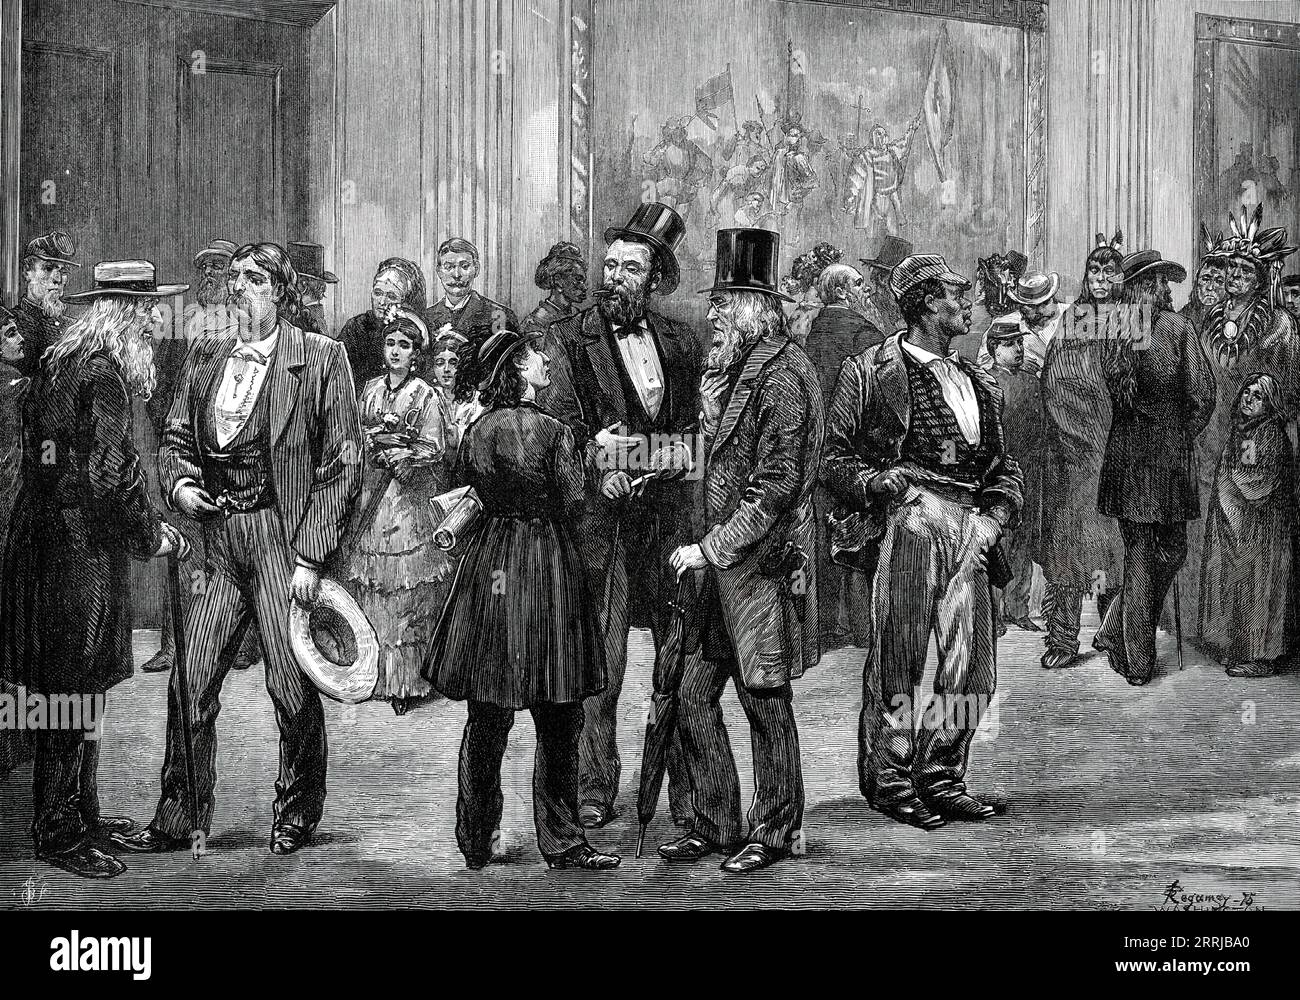 American Sketches: scene in the Rotunda, Washington, 1876. '...an Illustration of the manner in which people stand about the Rotunda, &quot;lobbying&quot; the members of Congress for purposes not always reprehensible, or simply wanting to pick up a dose of political gossip, or to indulge their personal curiosity with a sight of the leading public men. Ladies, as well as gentlemen, are observed not seldom among the frequenters of this place; and Dr. Mary Walker, the female medical practitioner, wearing her Bloomer suit of tunic and trousers, happened to figure in a foreground group at the momen Stock Photo